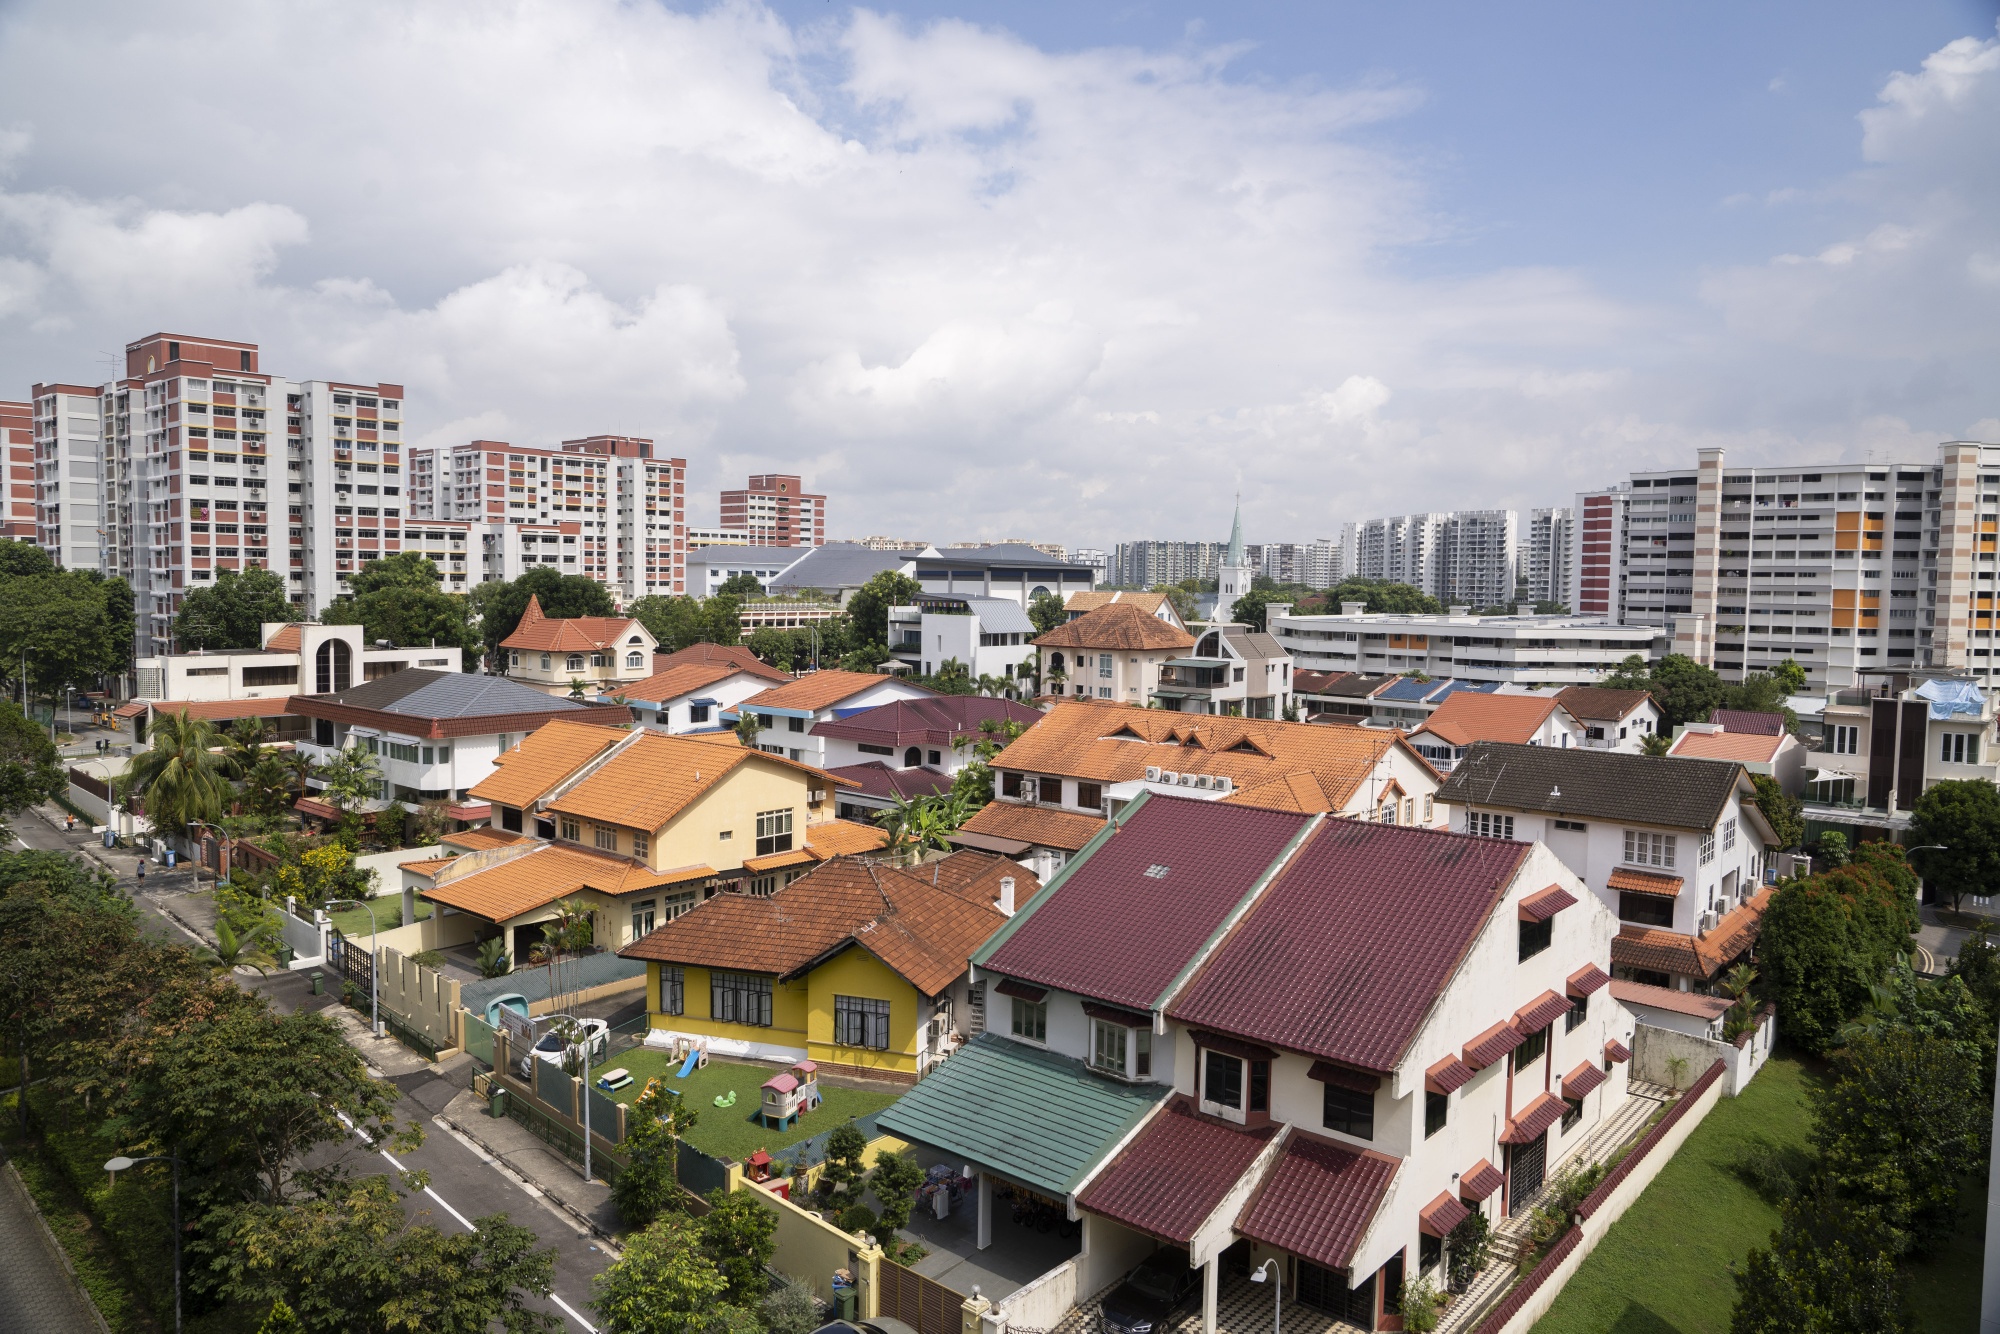 Singapore Home Sales Decline as Property Curbs Introduced